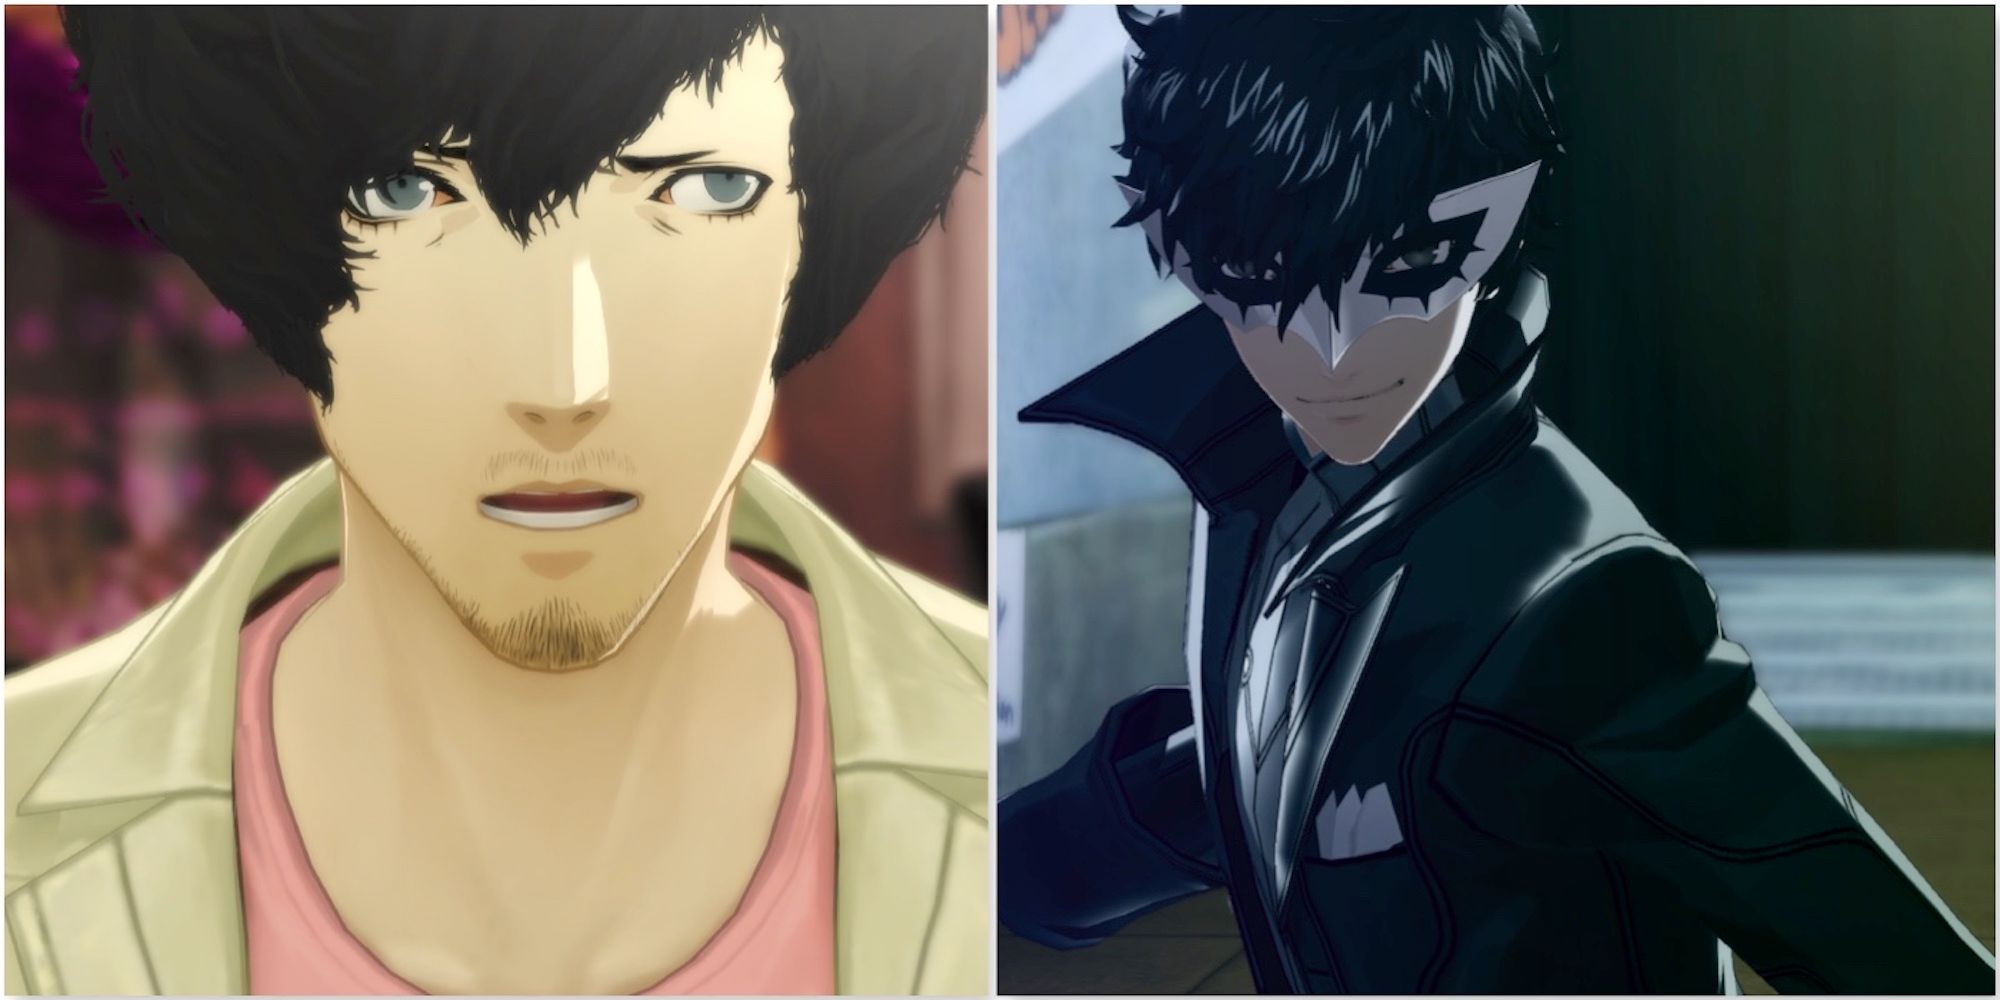 Vincent from Catherine and Joker from Persona 5